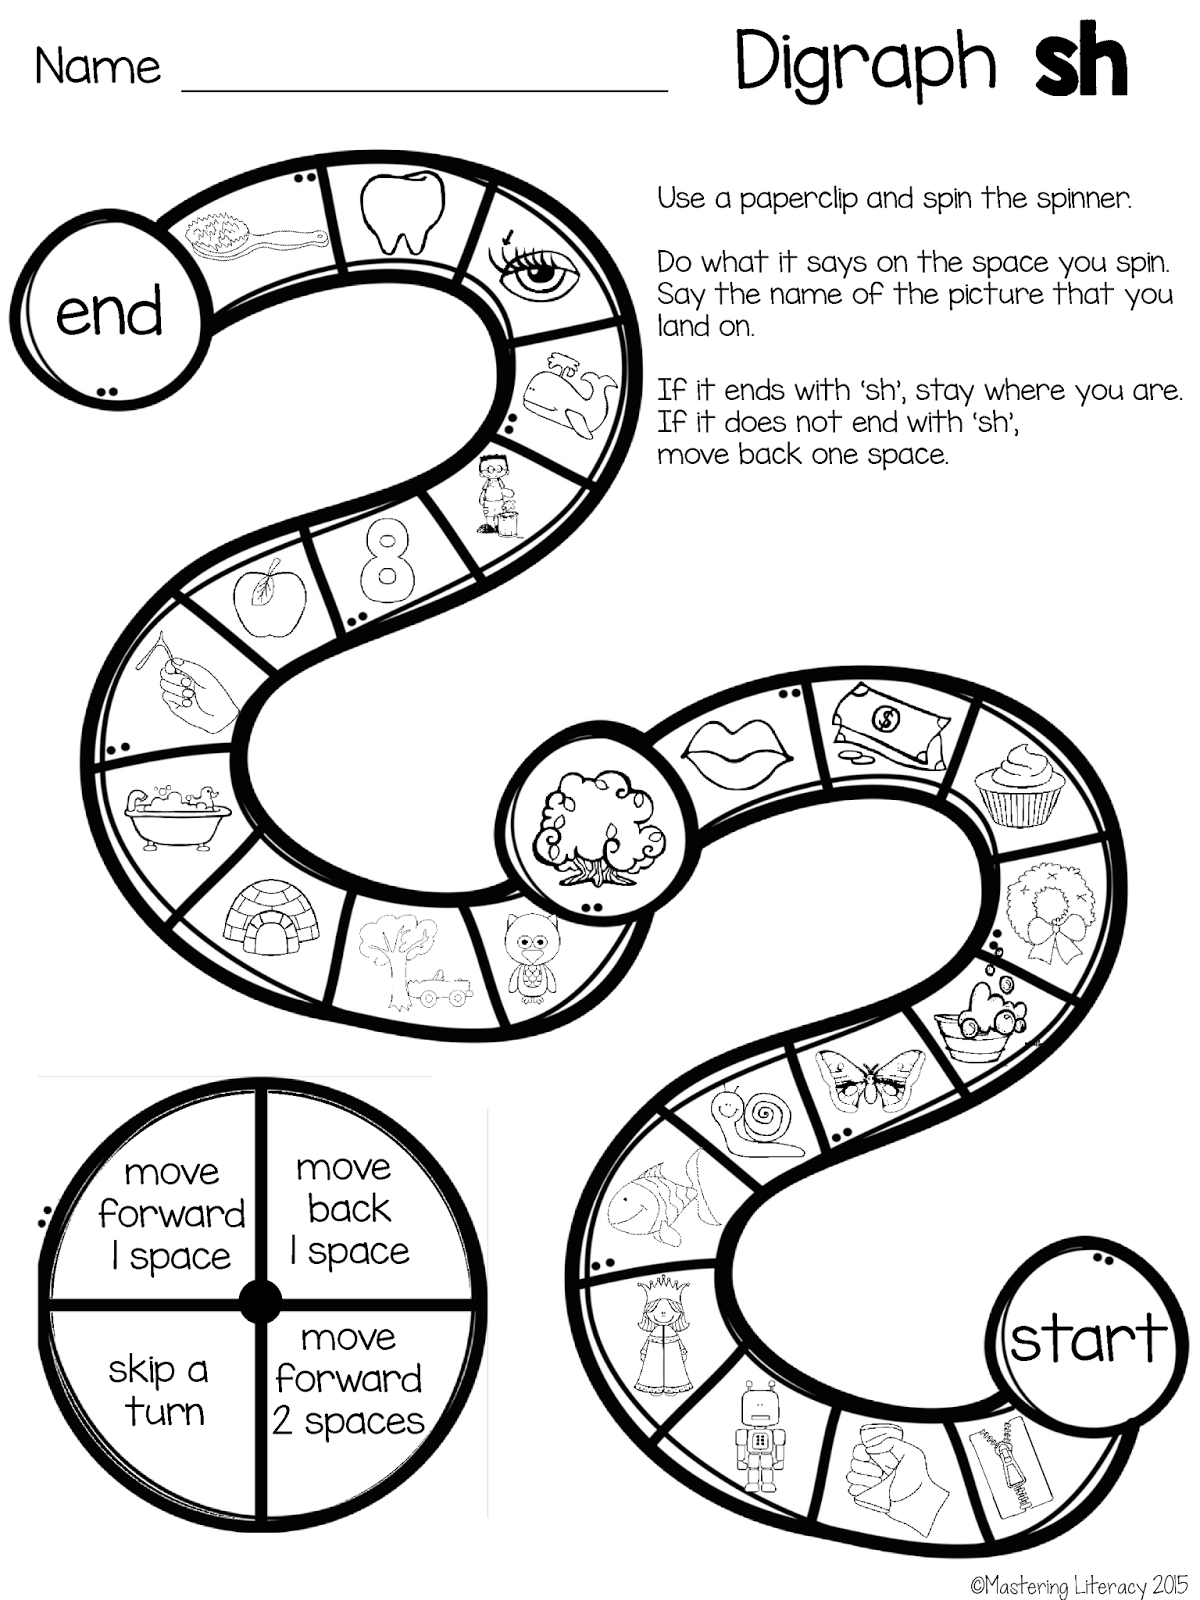 digraph sh worksheets first grade beginning digraph sound recognition